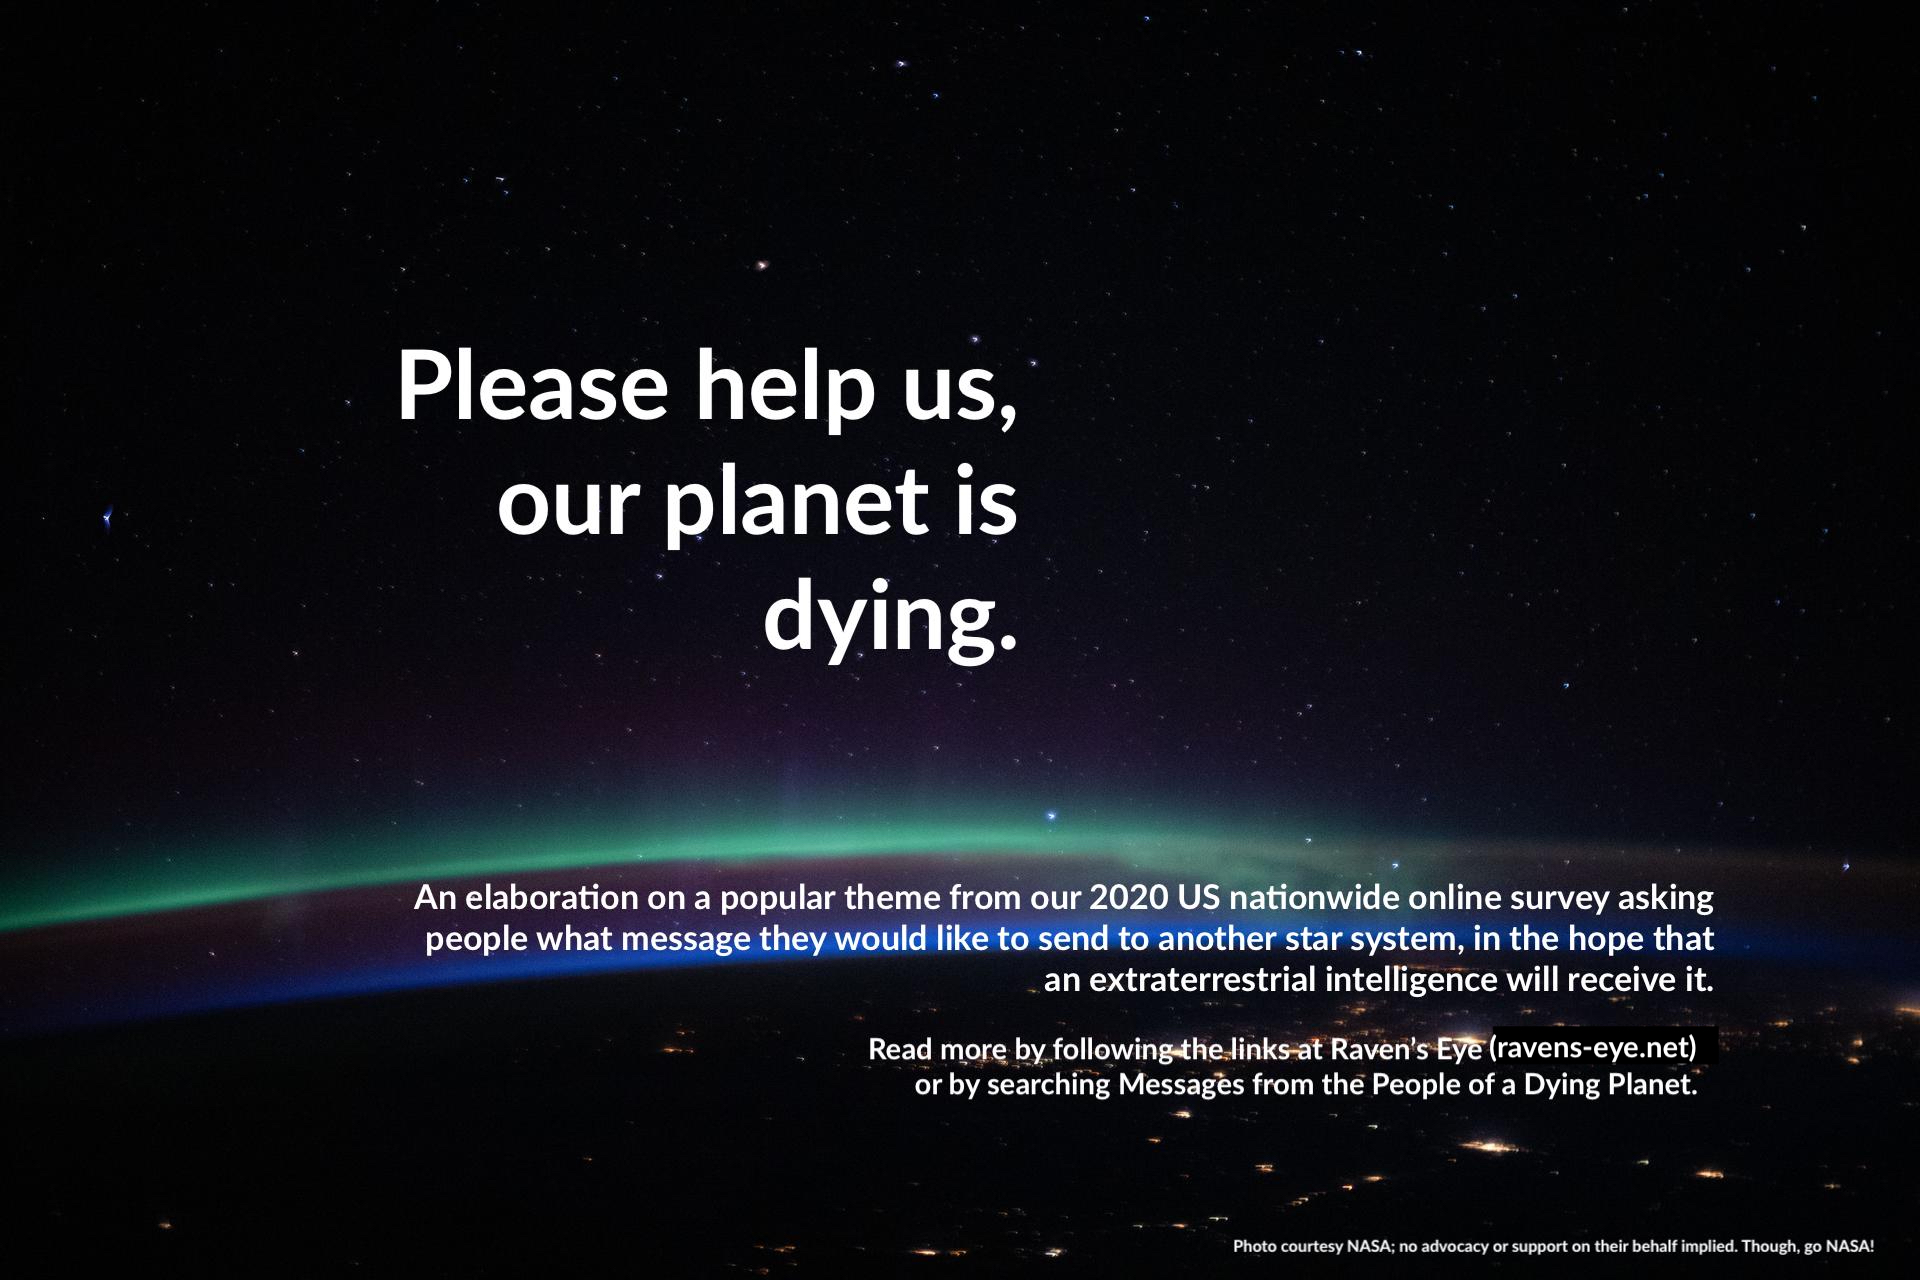 please help us, our planet is dying